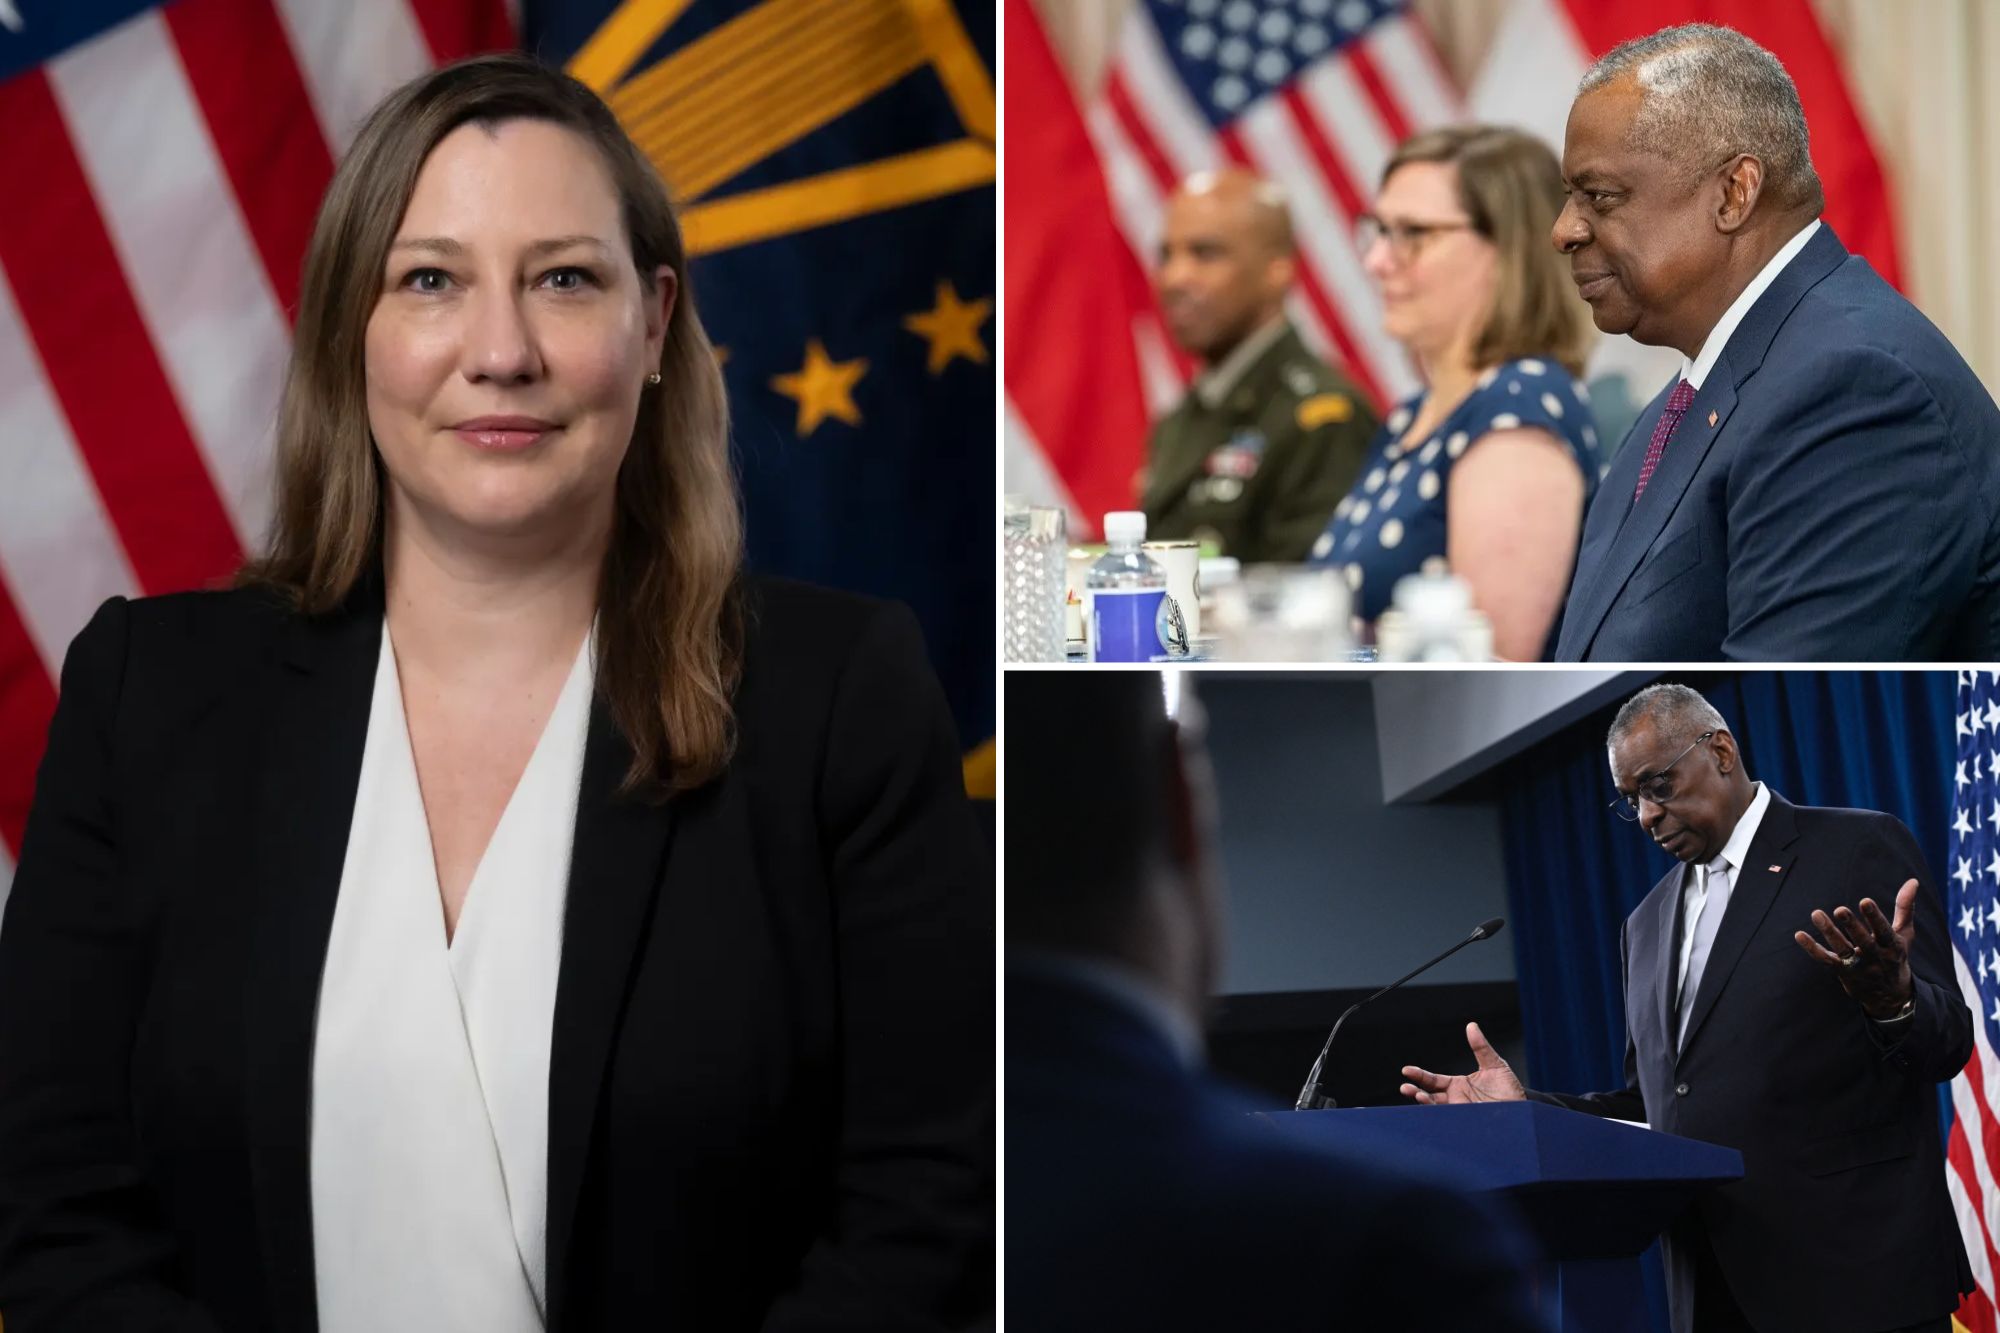 Lloyd Austin's chief of staff, blamed for Pentagon chief's hospitalization secrecy, to step down